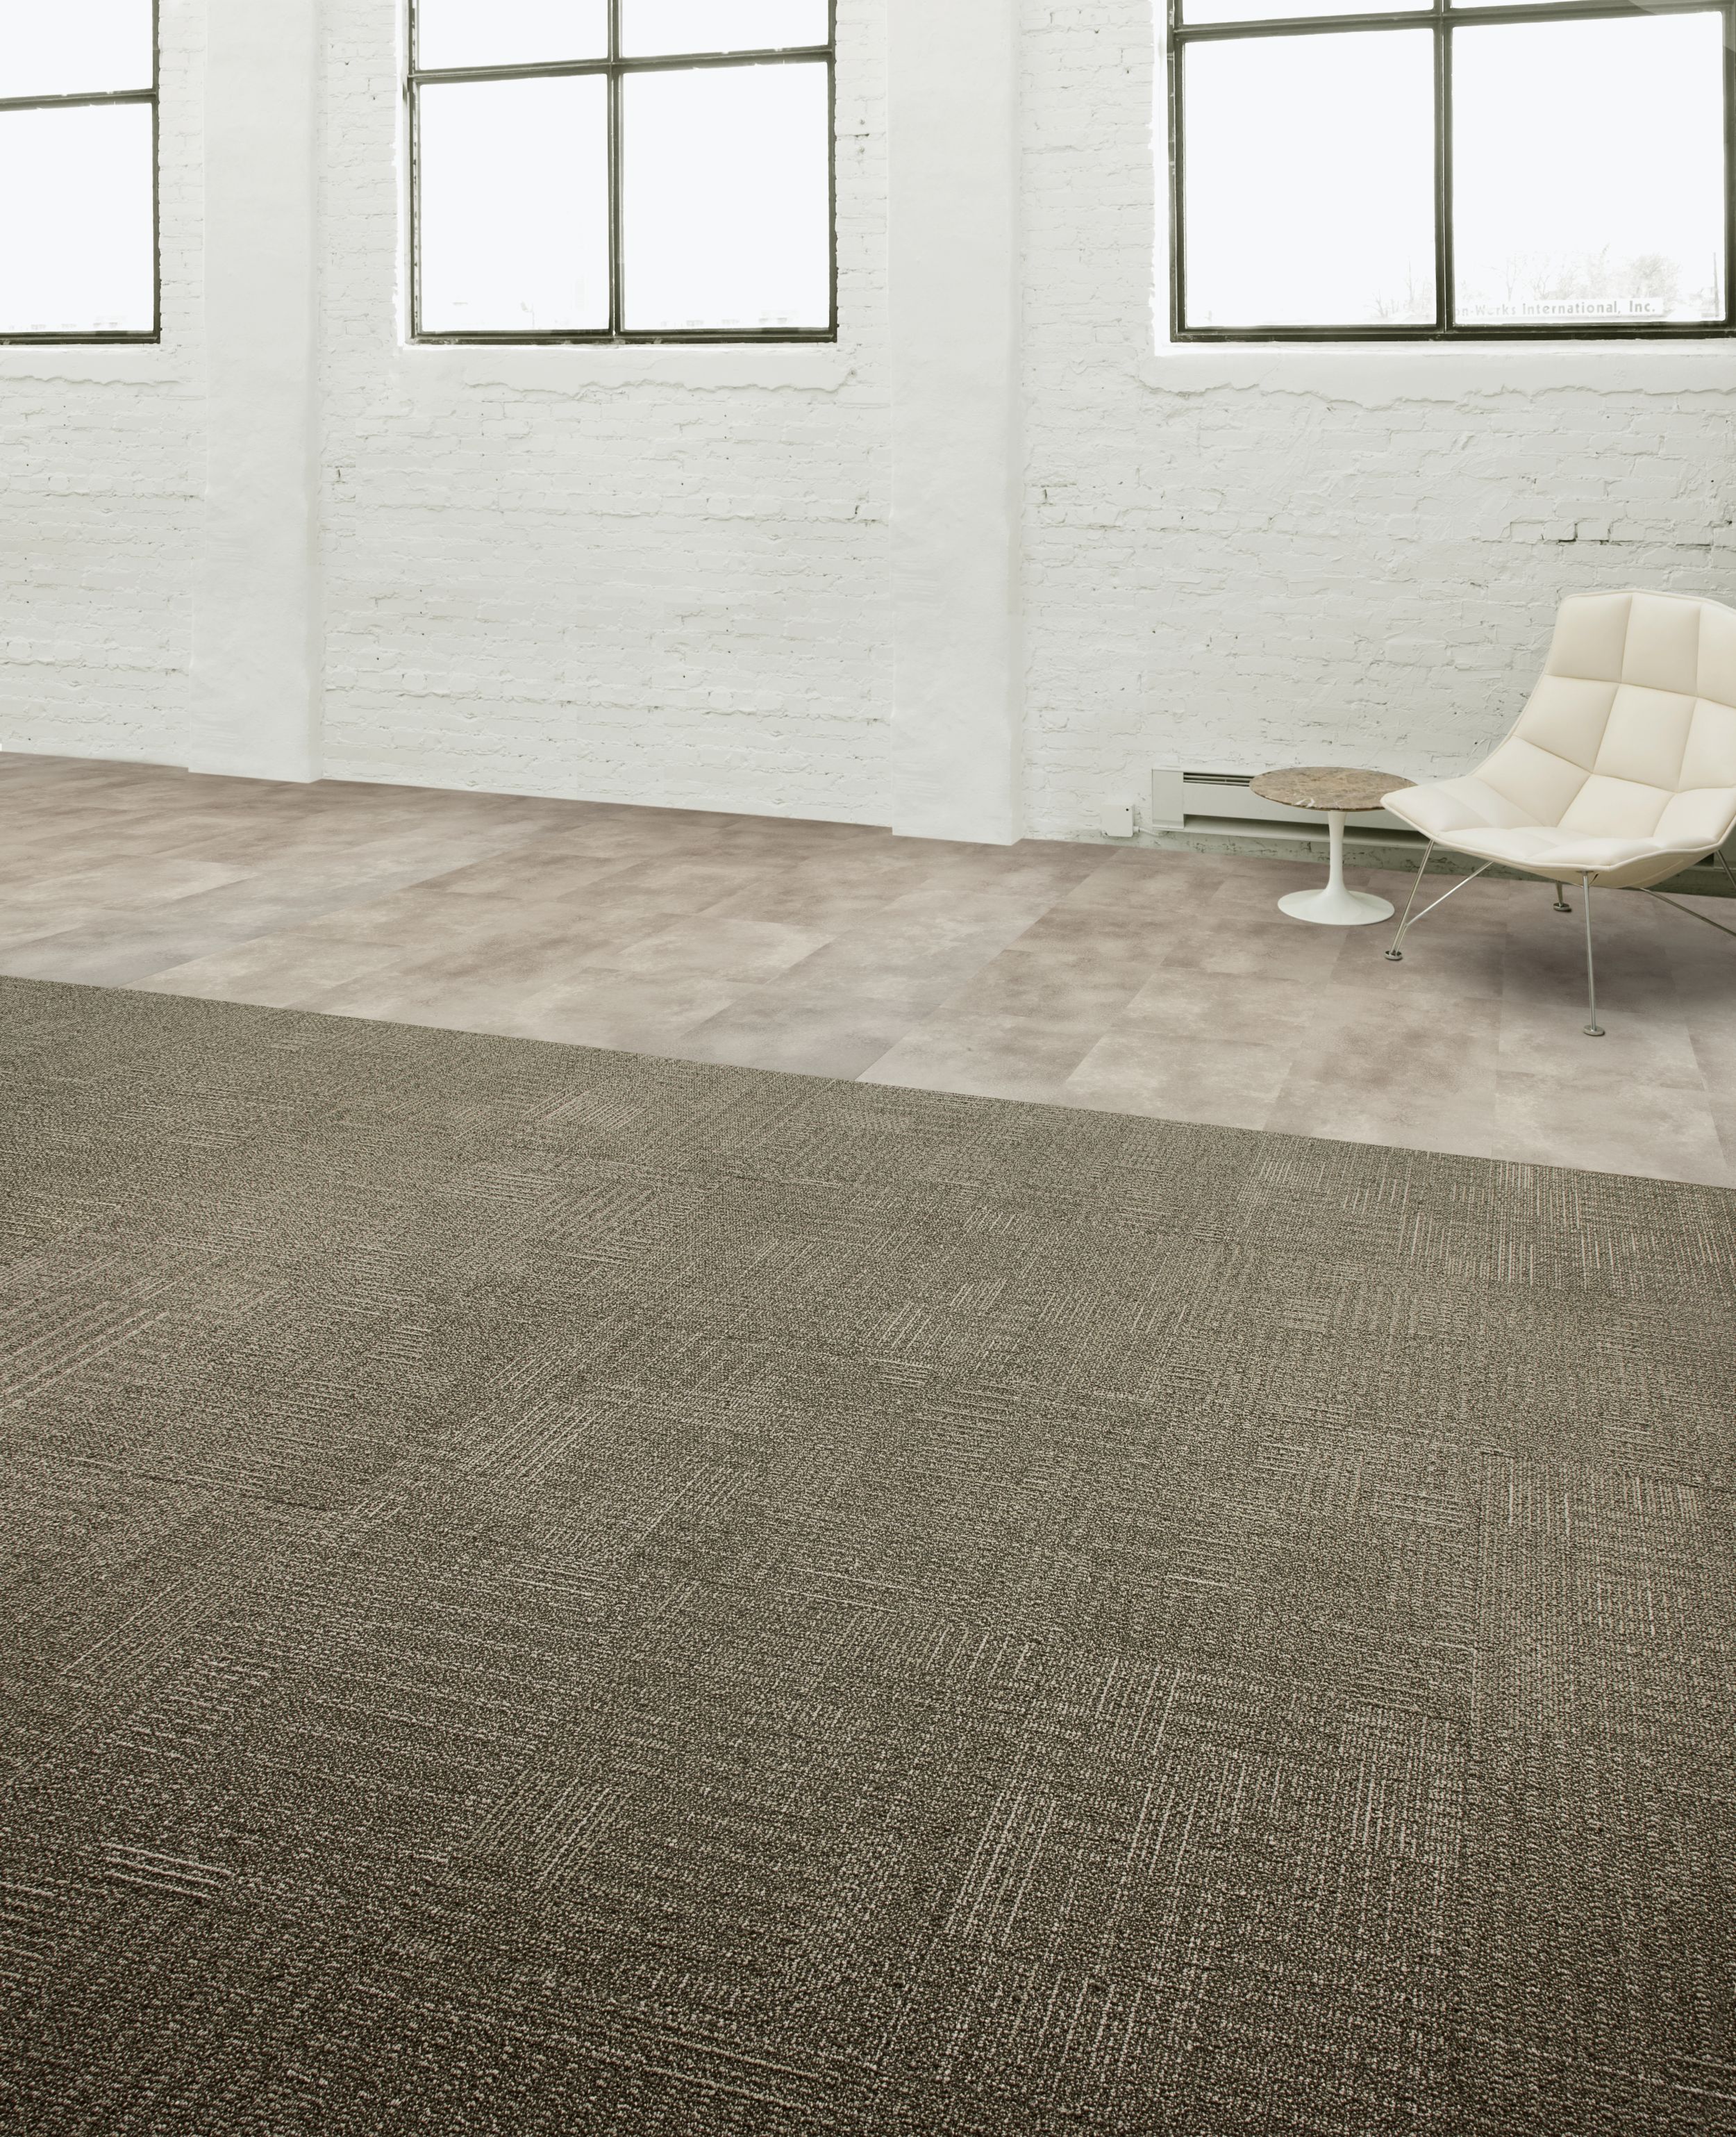 Interface CT101 carpet tile and Textured Stones LVT in open area with concrete walls and chair imagen número 5